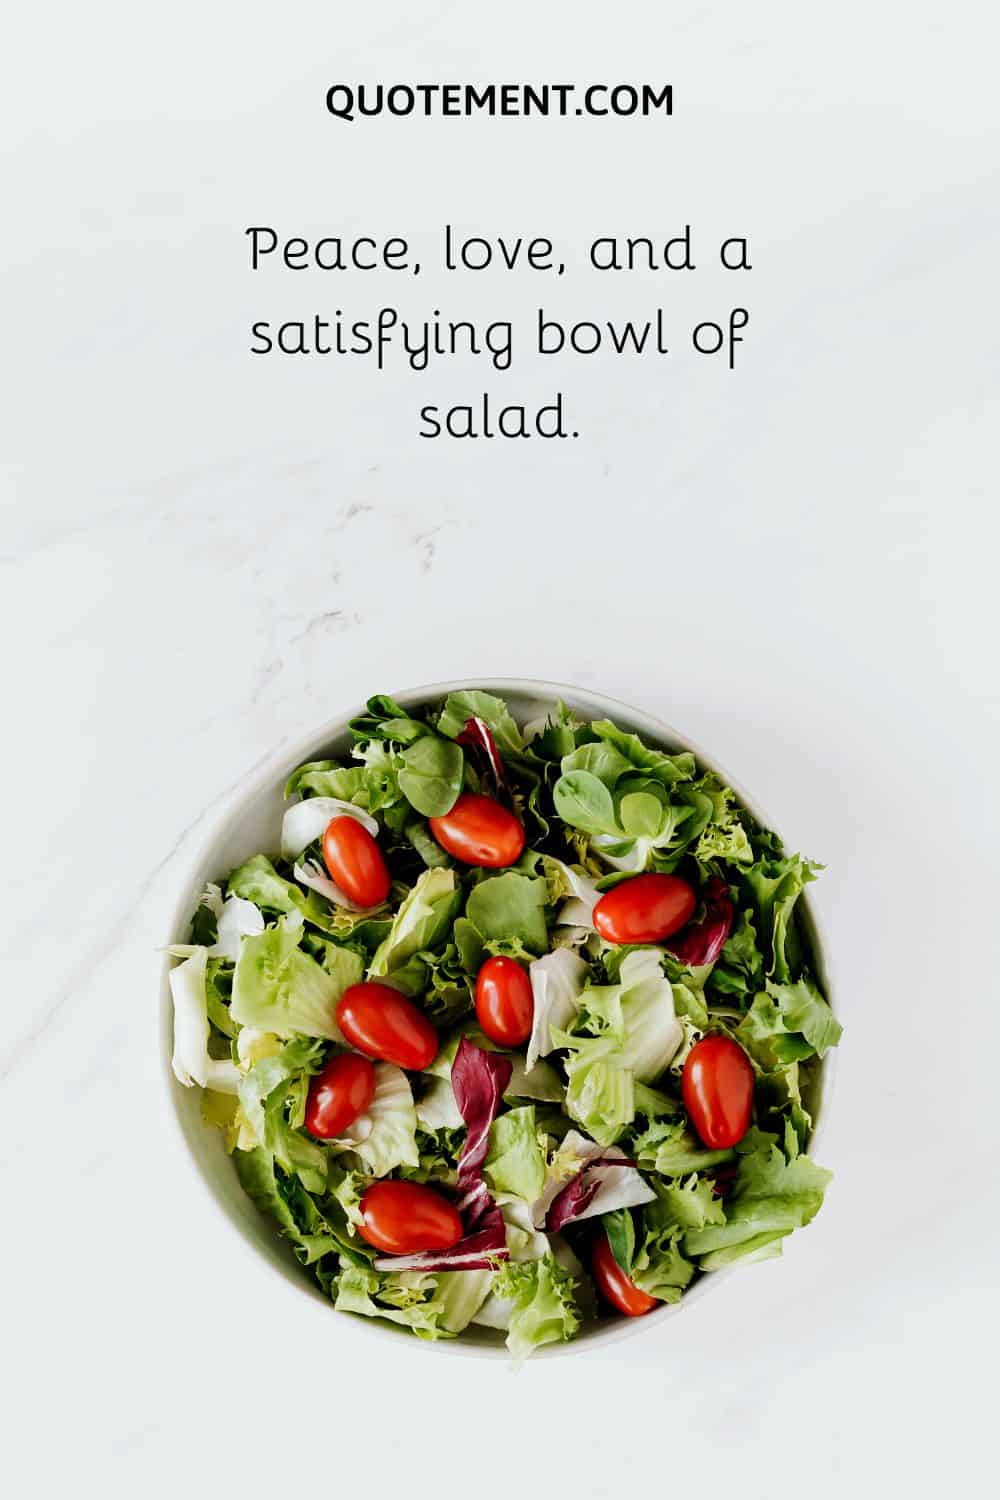 Peace, love, and a satisfying bowl of salad